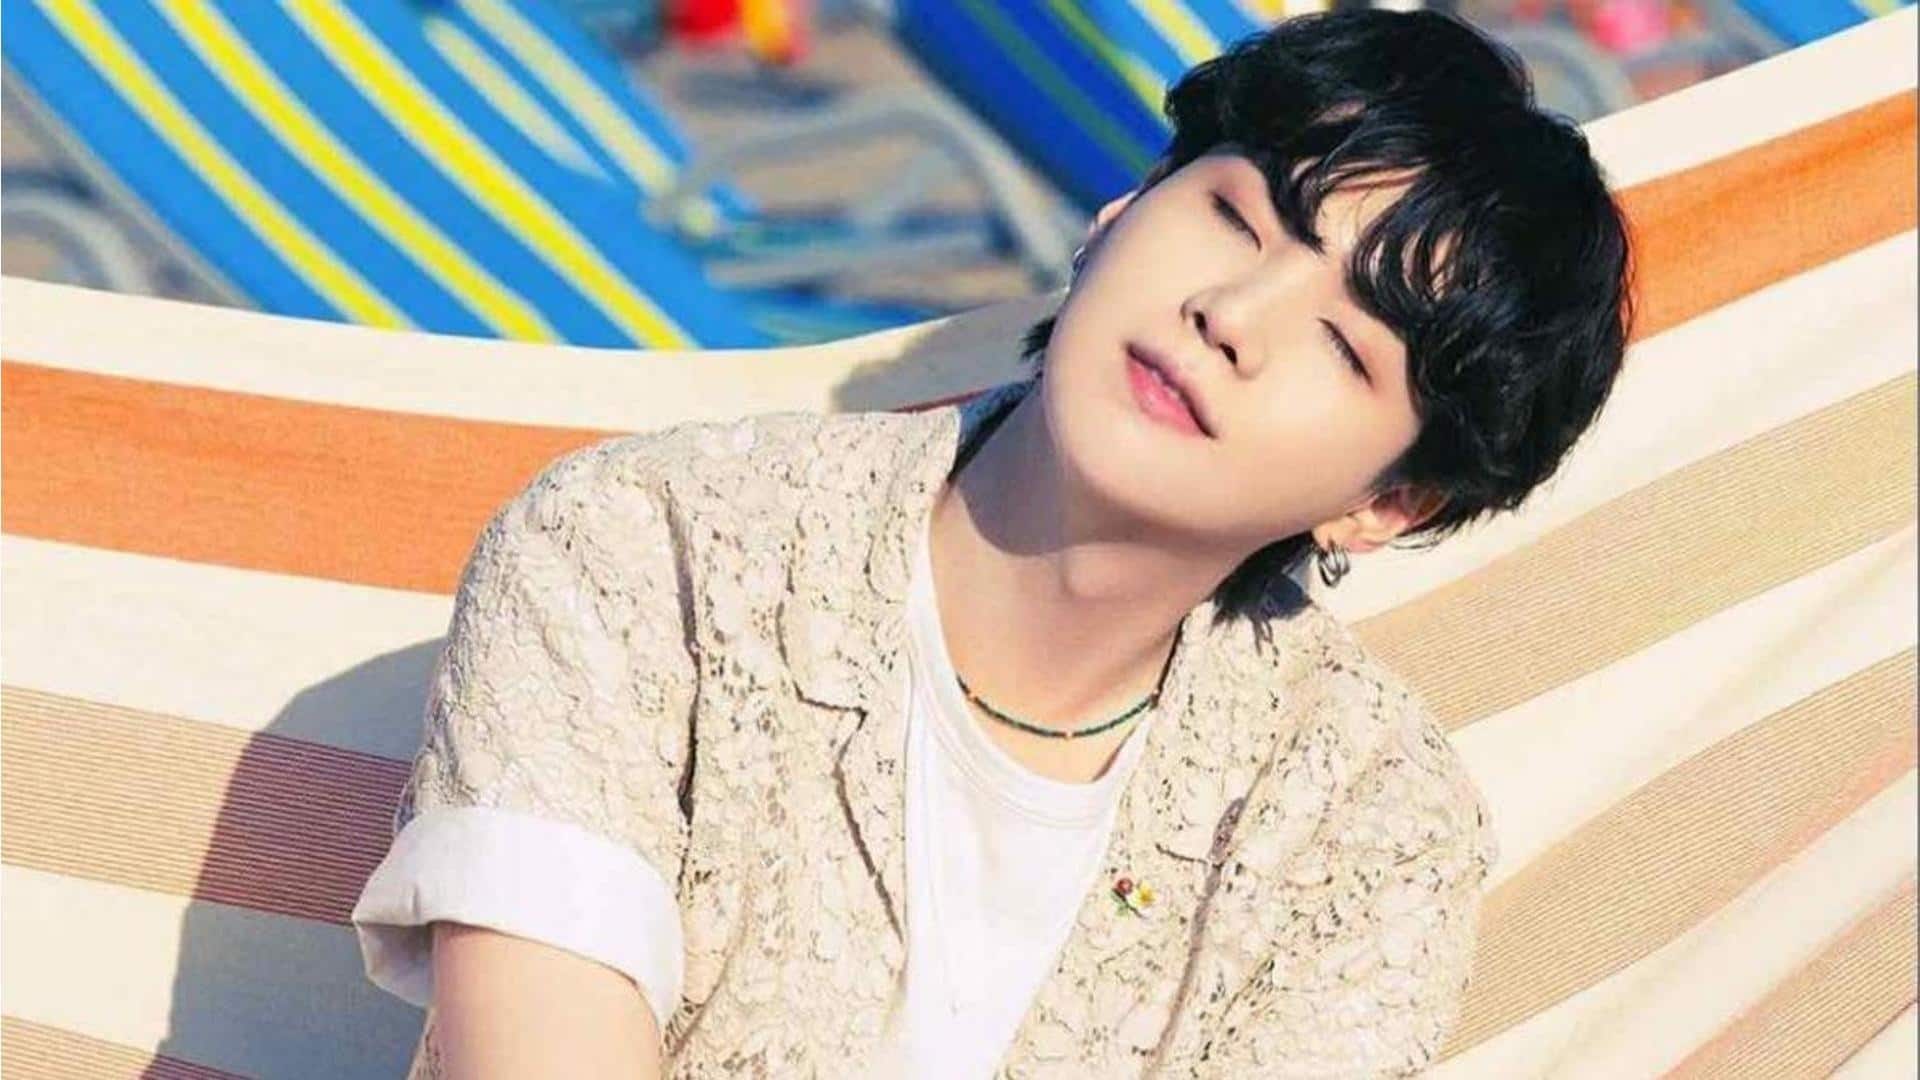 BTS Suga kicks off his first world tour in NYC